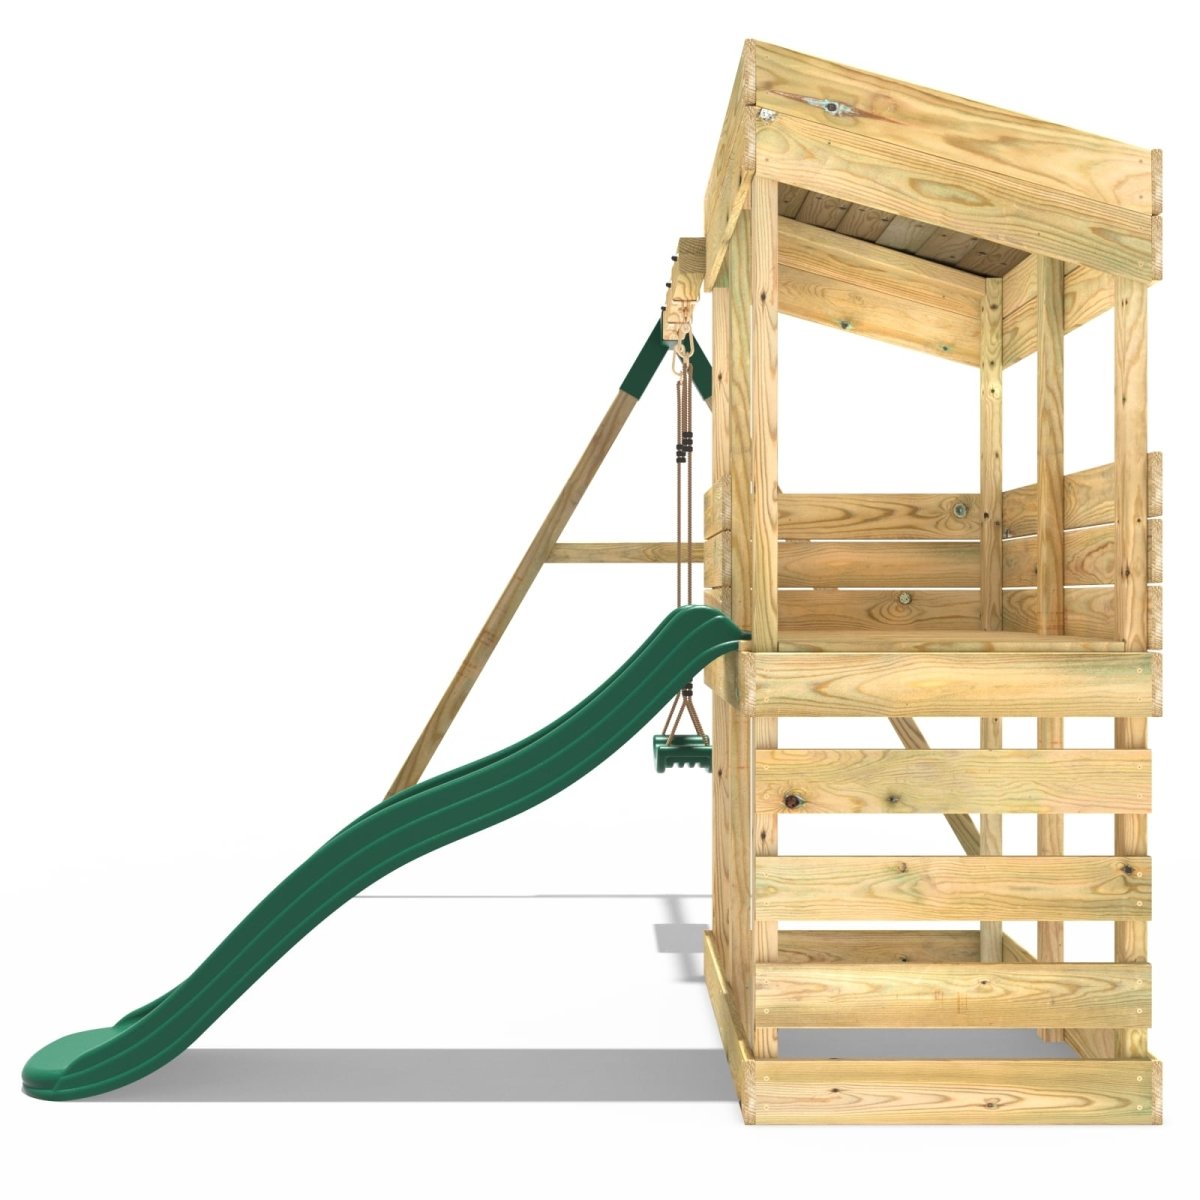 Rebo Wooden Lookout Tower Playhouse with 6ft Slide & Swing - Arches